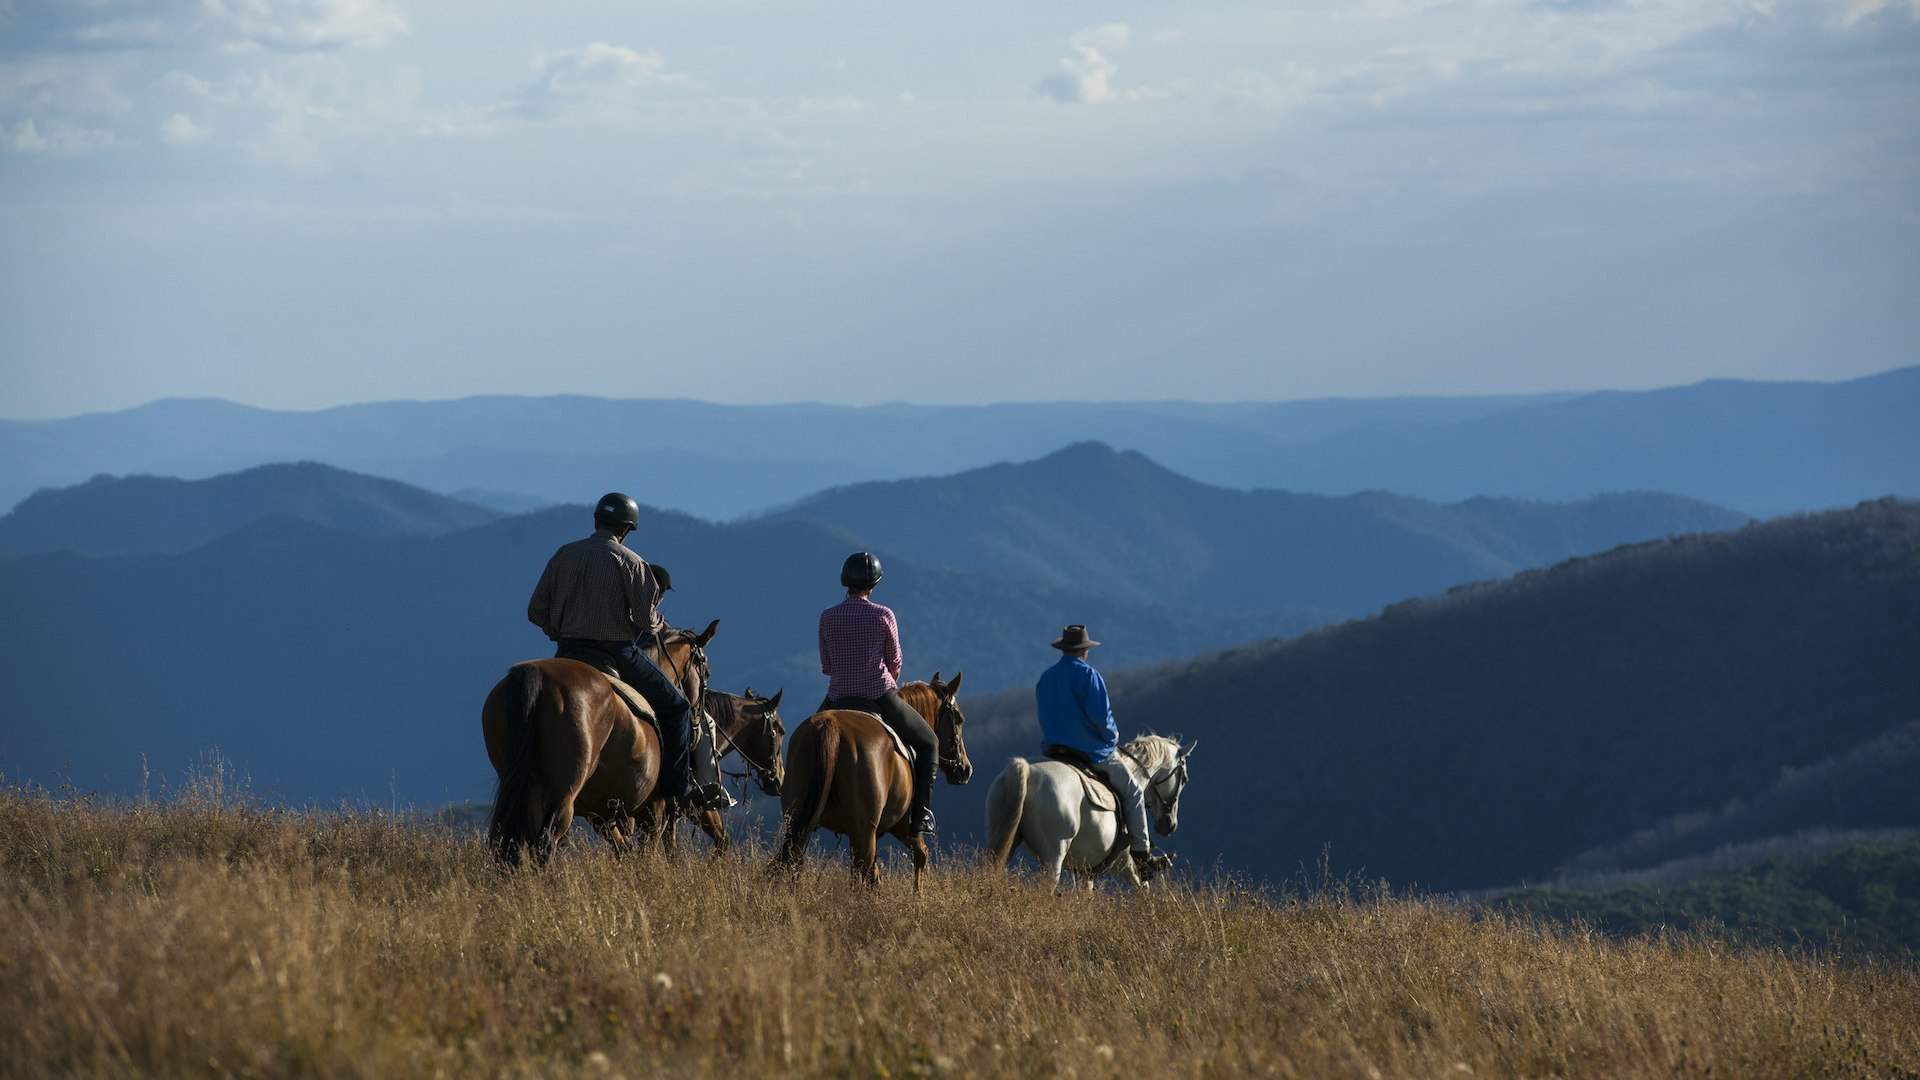 Cross rugged countryside with <a href="https://watsonstrailrides.com.au/">Watsons Mountain Country Trail Rides</a>